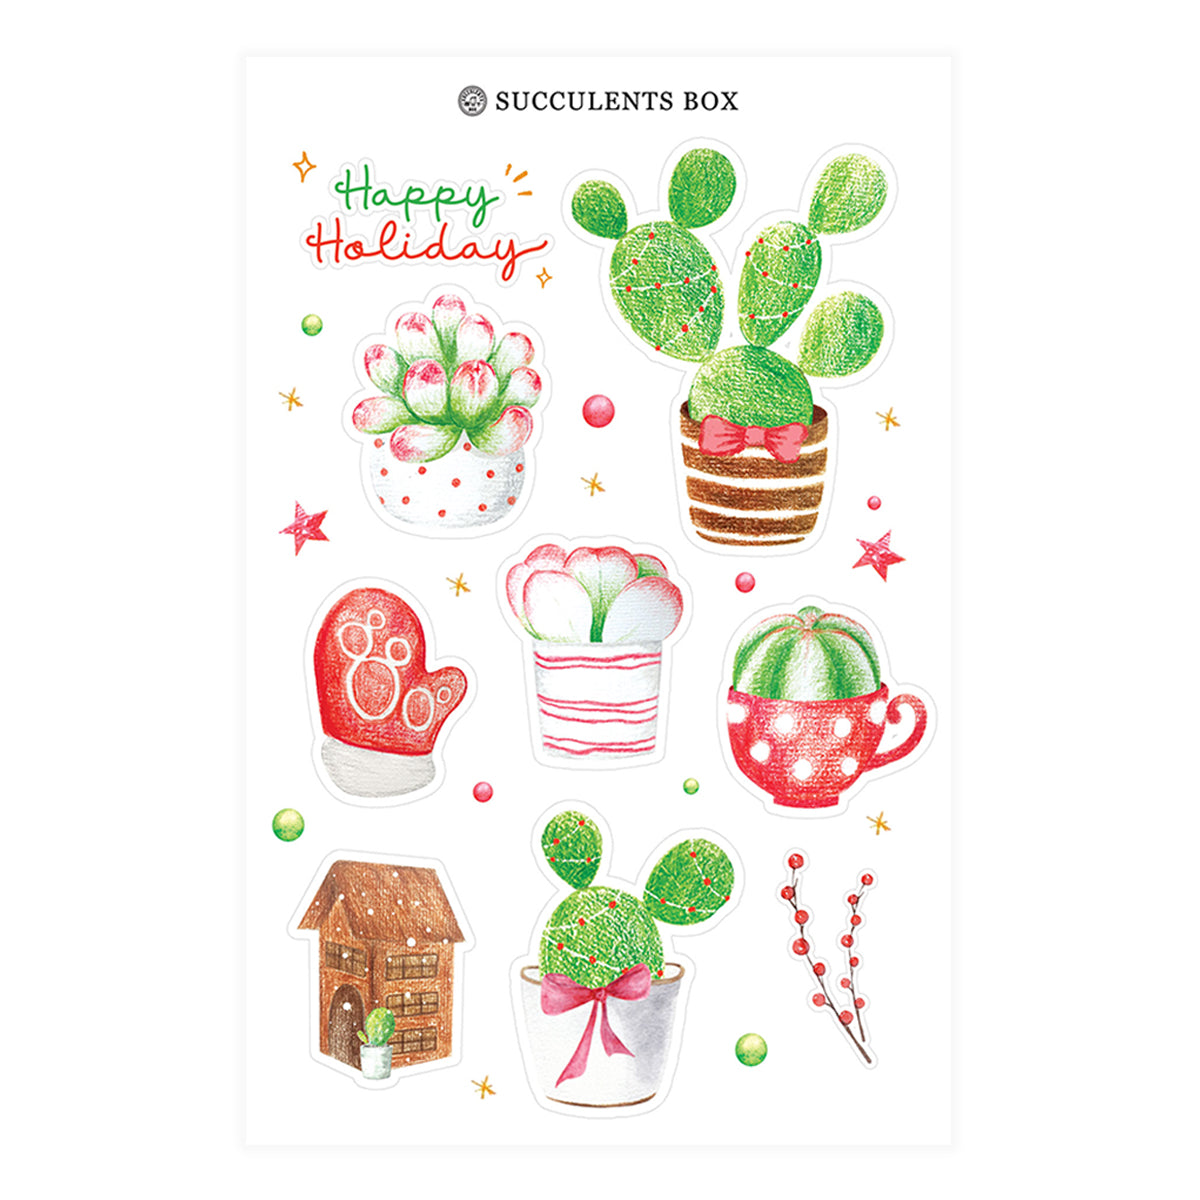 succulent stickers for sale, cactus stickers for sale, succulent craft ideas, succulent gift ideas, cute plant stickers, holiday stickers